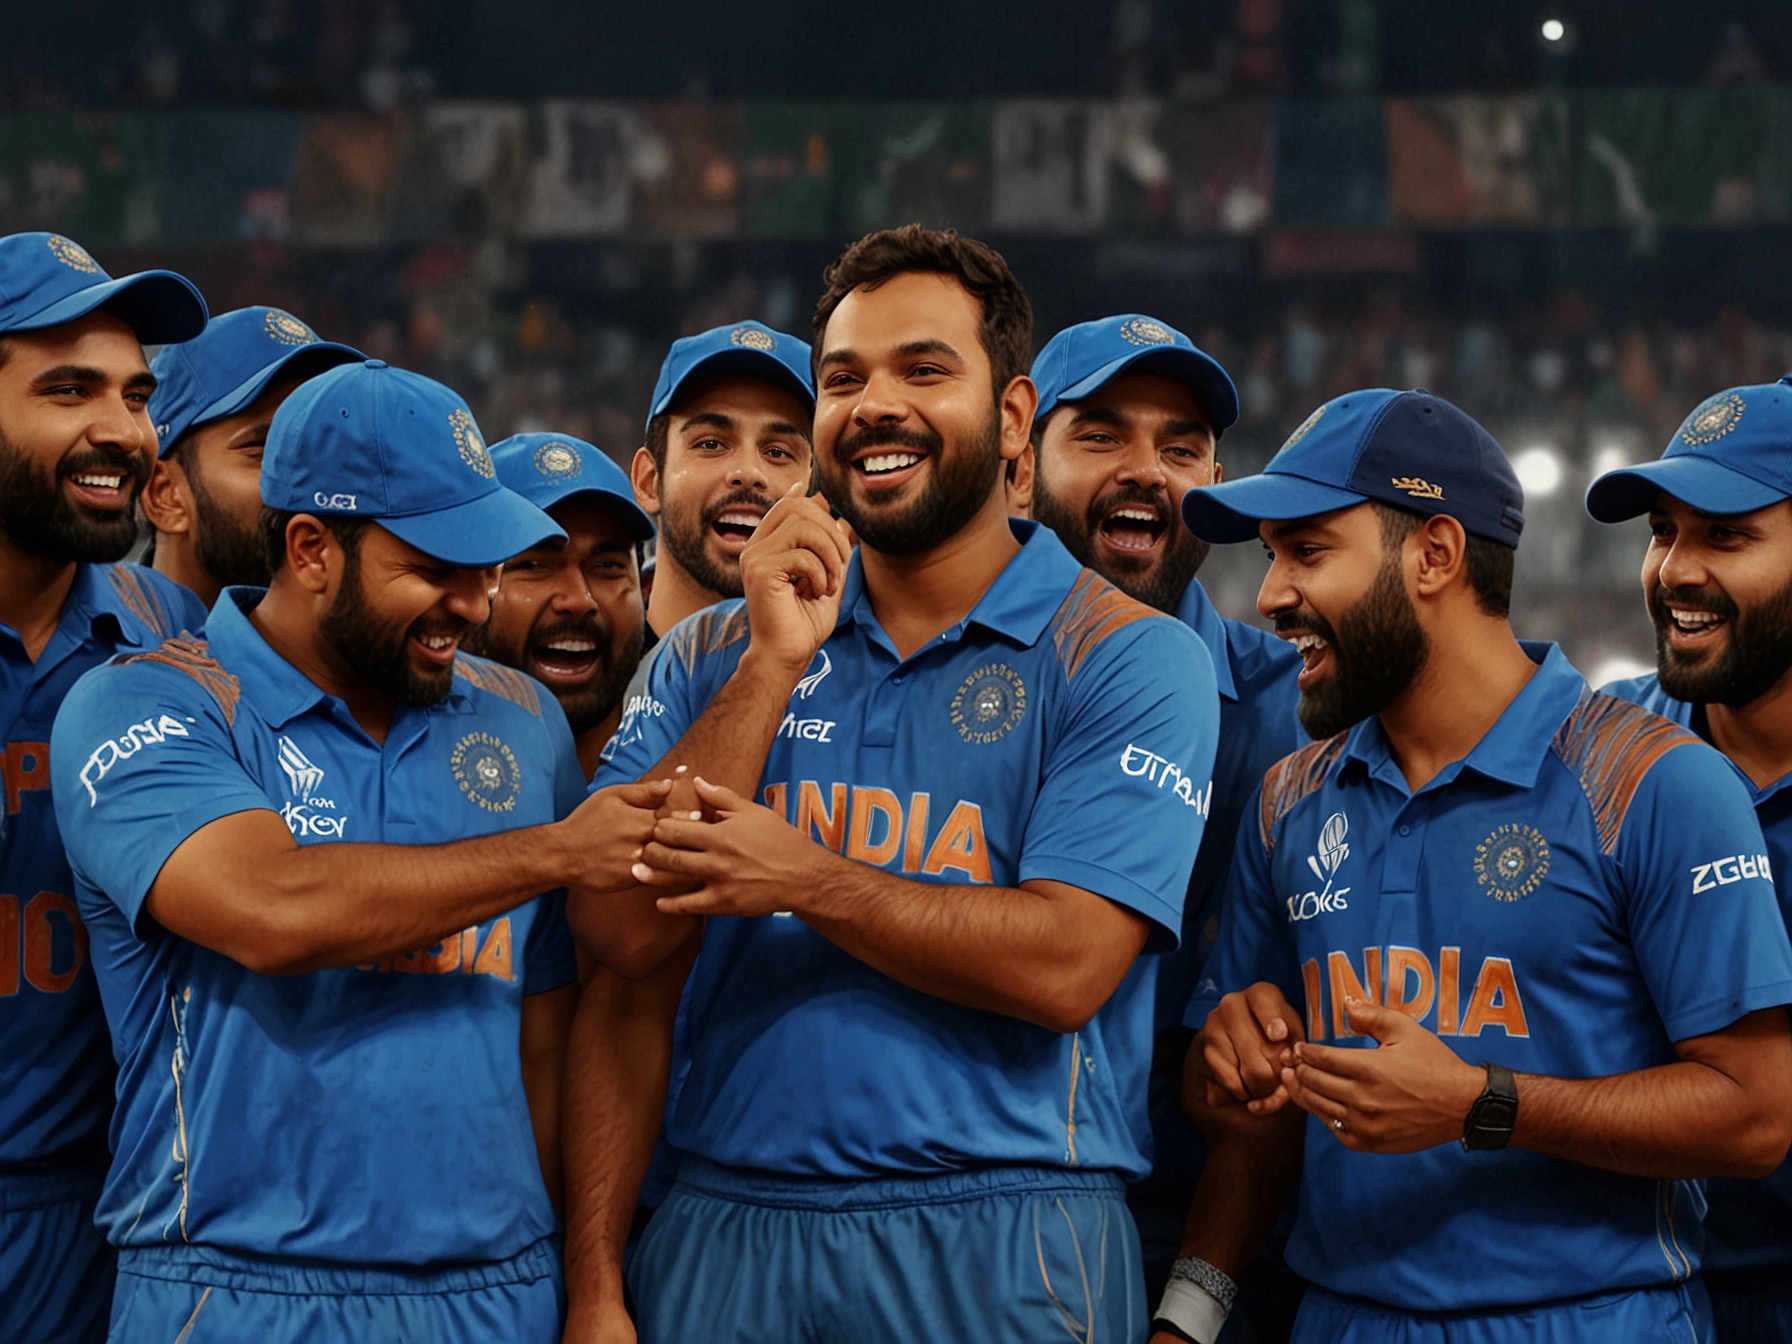 Rohit Sharma addresses the team after their T20 World Cup semi-final victory over England, highlighting strategic decisions and team's collective effort.